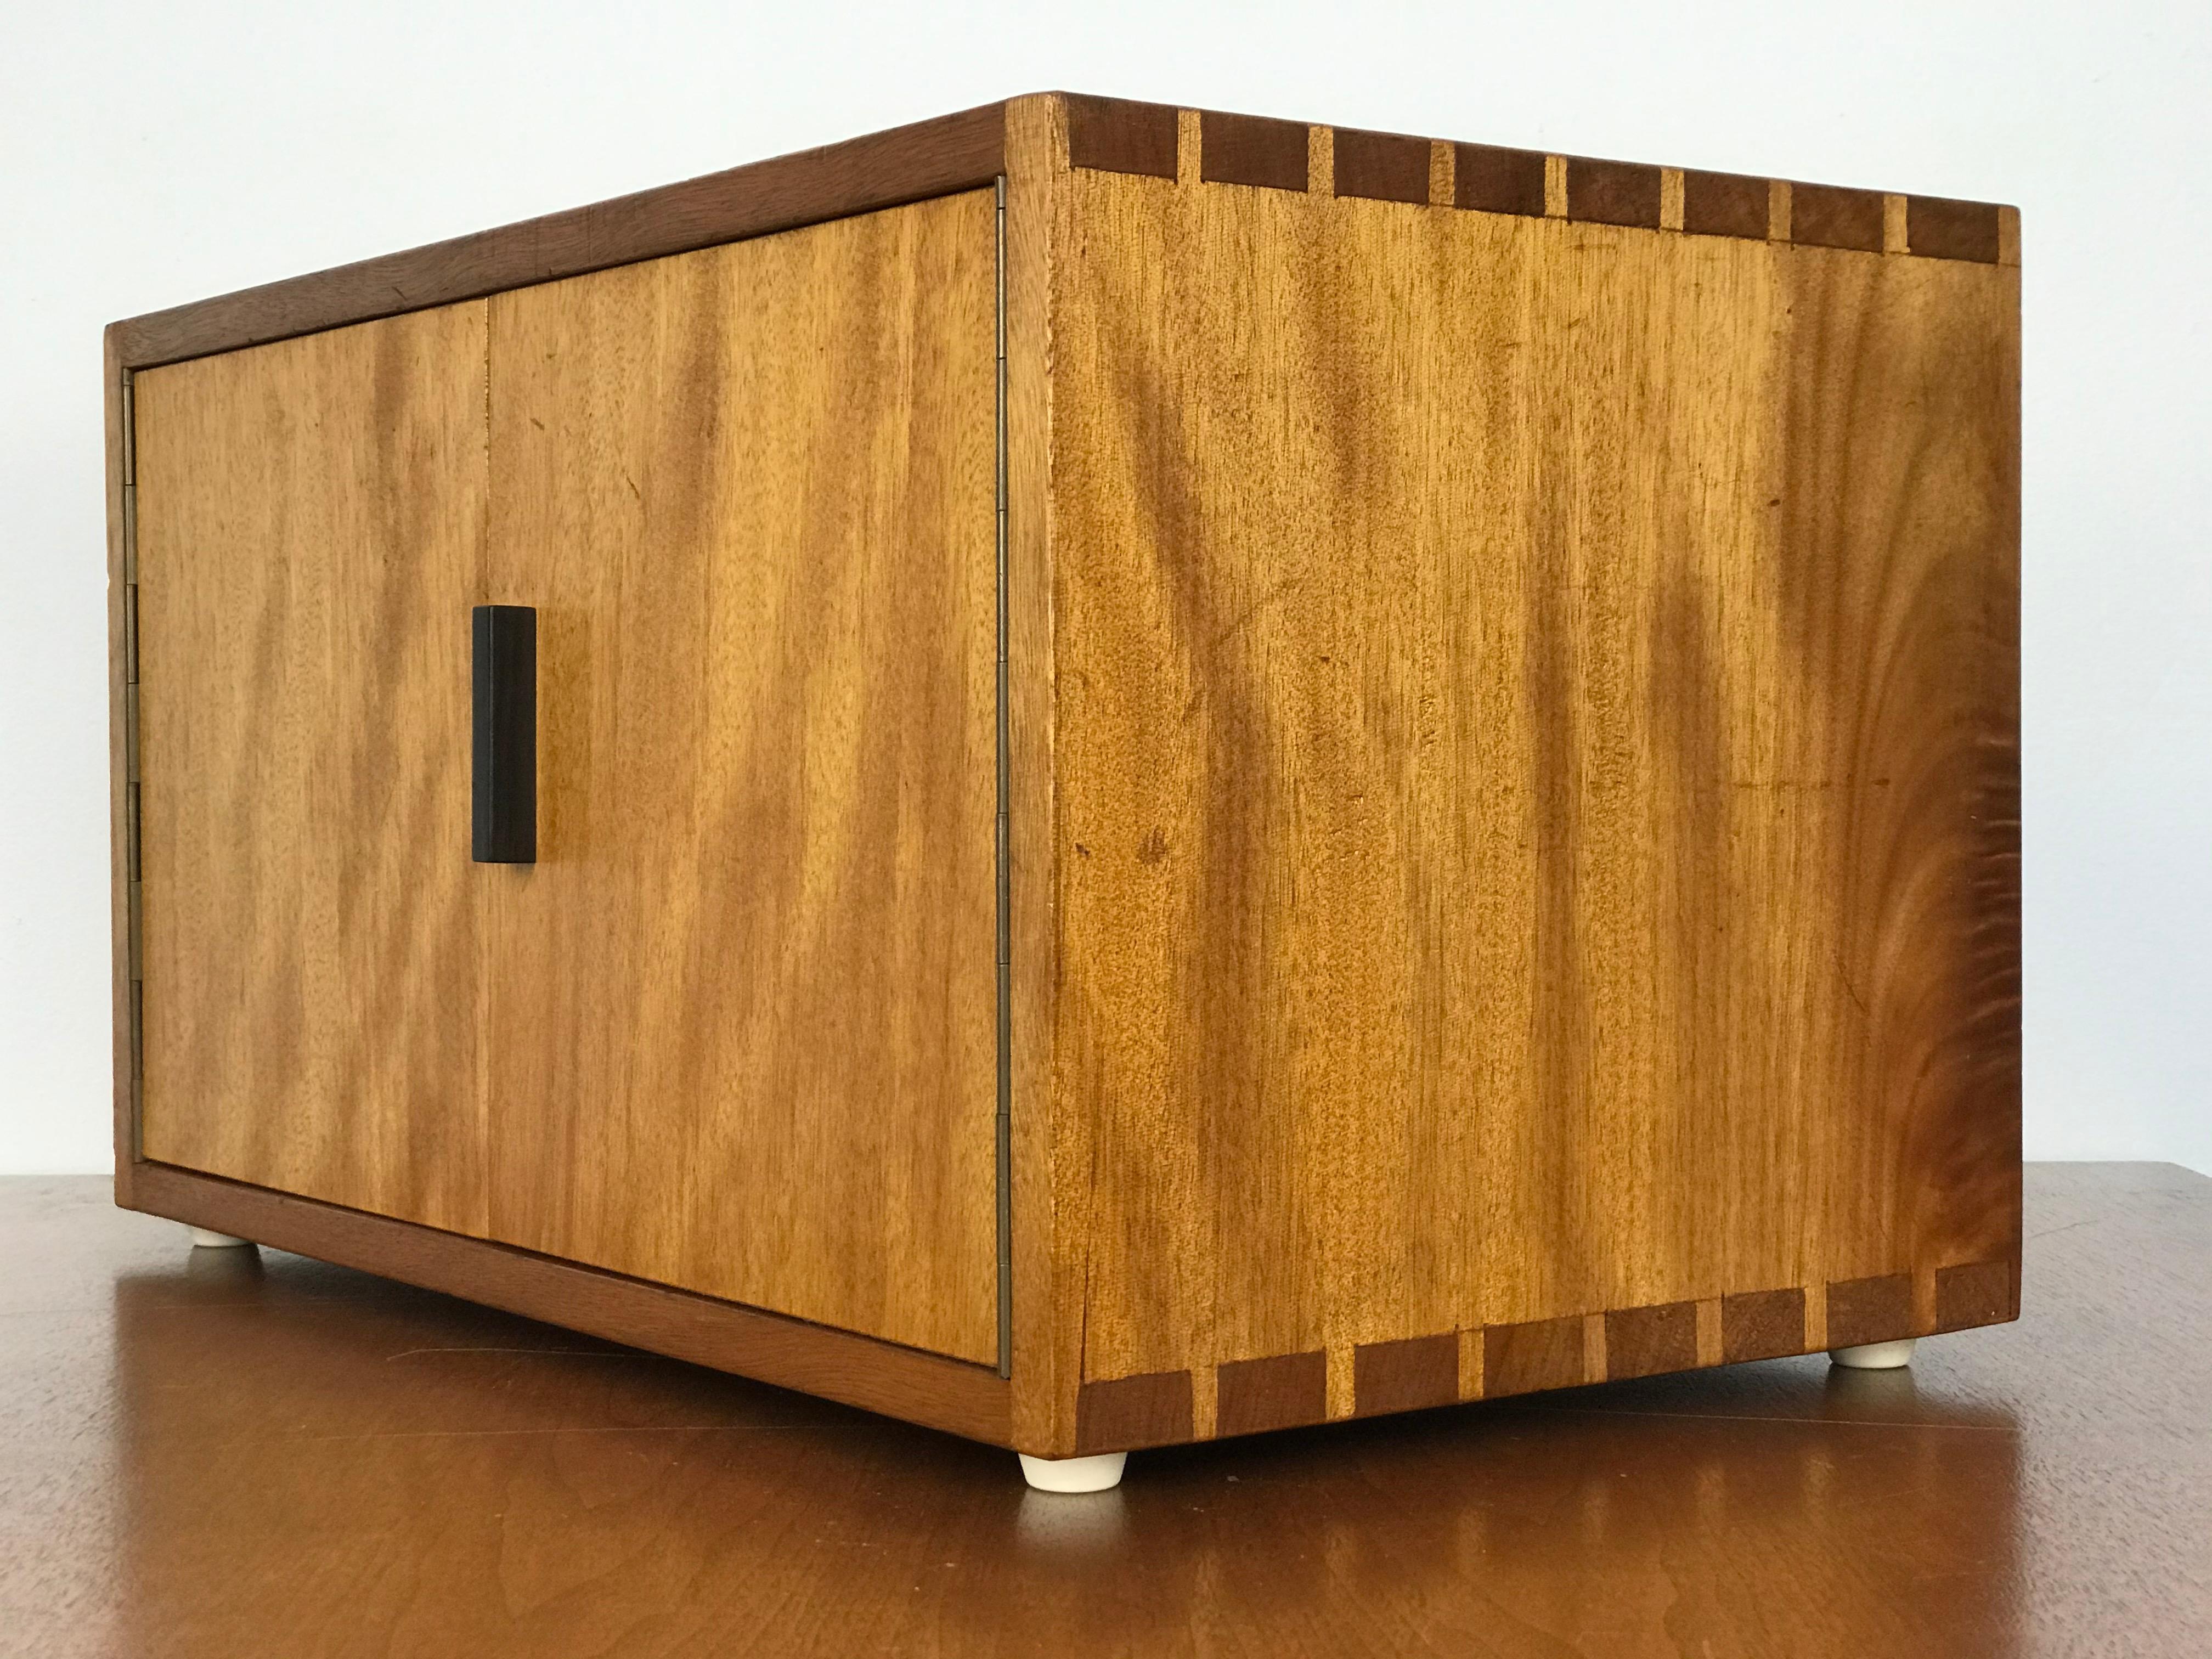 Unusual handcrafted tabletop box featuring dovetail joinery, a rosewood pull and a shelf, with circular cut-outs in the back. Unmarked/maker unknown. On four white rubber feet that keeps it in place. The box is in original condition with minor